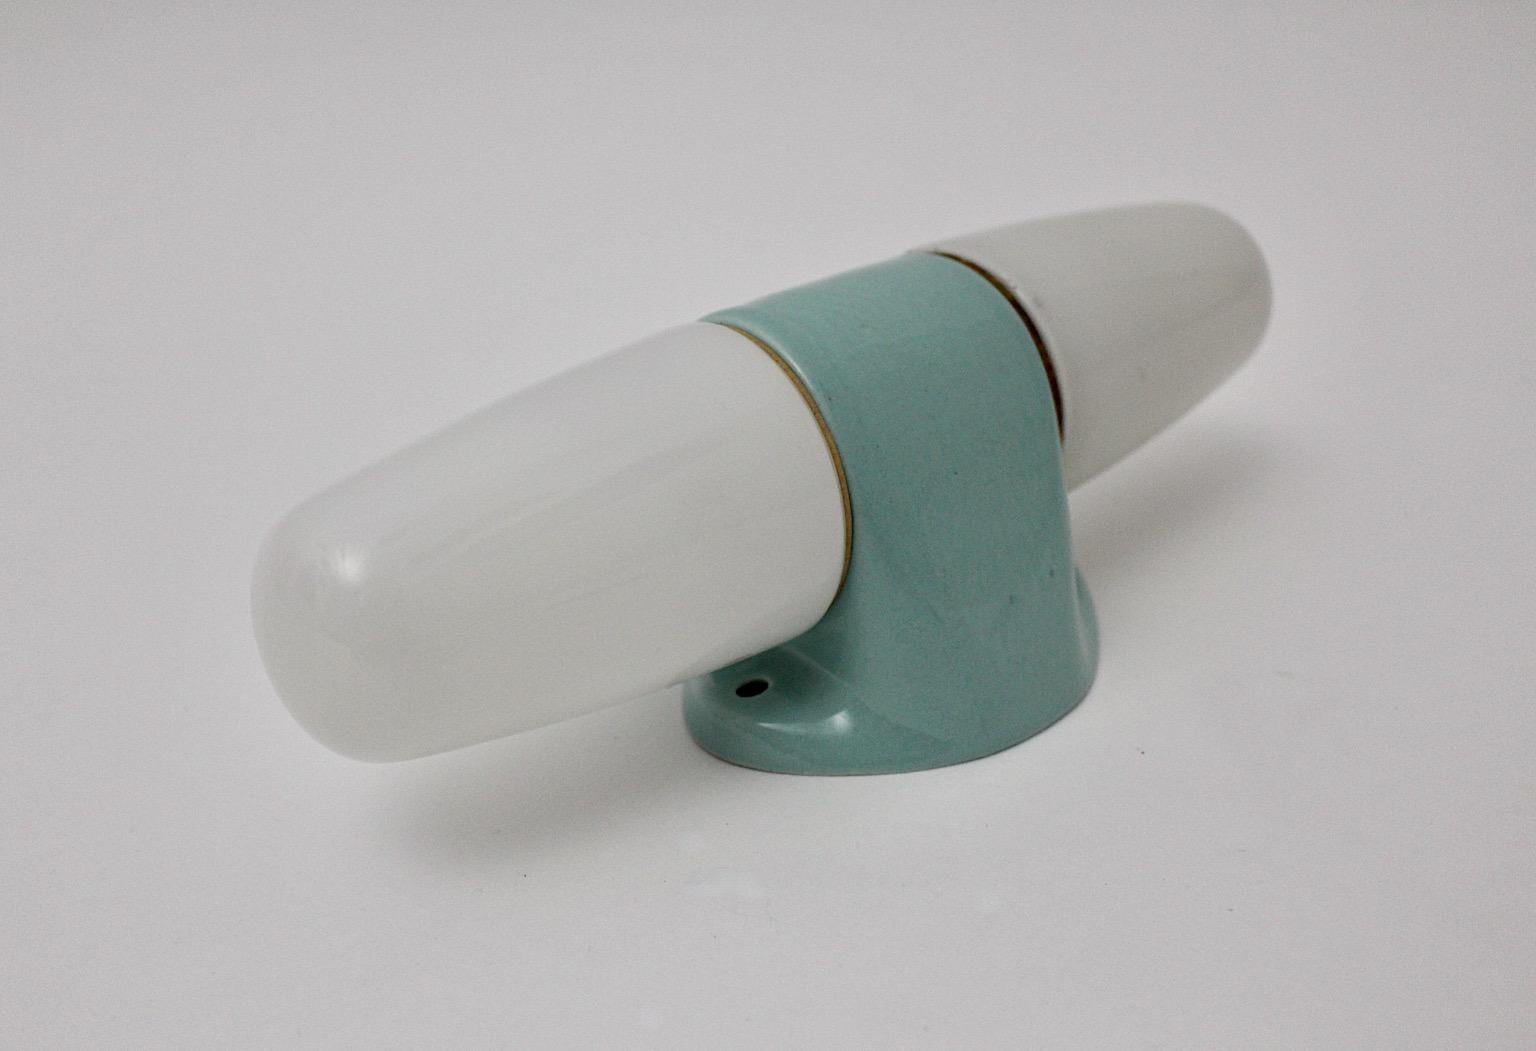 Mid-Century Modern sconce or wall light by Wilhelm Wagenfeld for Lindner Keramik 1950s Germany.
Sconce or wall light from white milky glass and pastel blue ceramic with two E 14 sockets.
Wilhelm Wagenfeld studied with the important teachers Laszlo